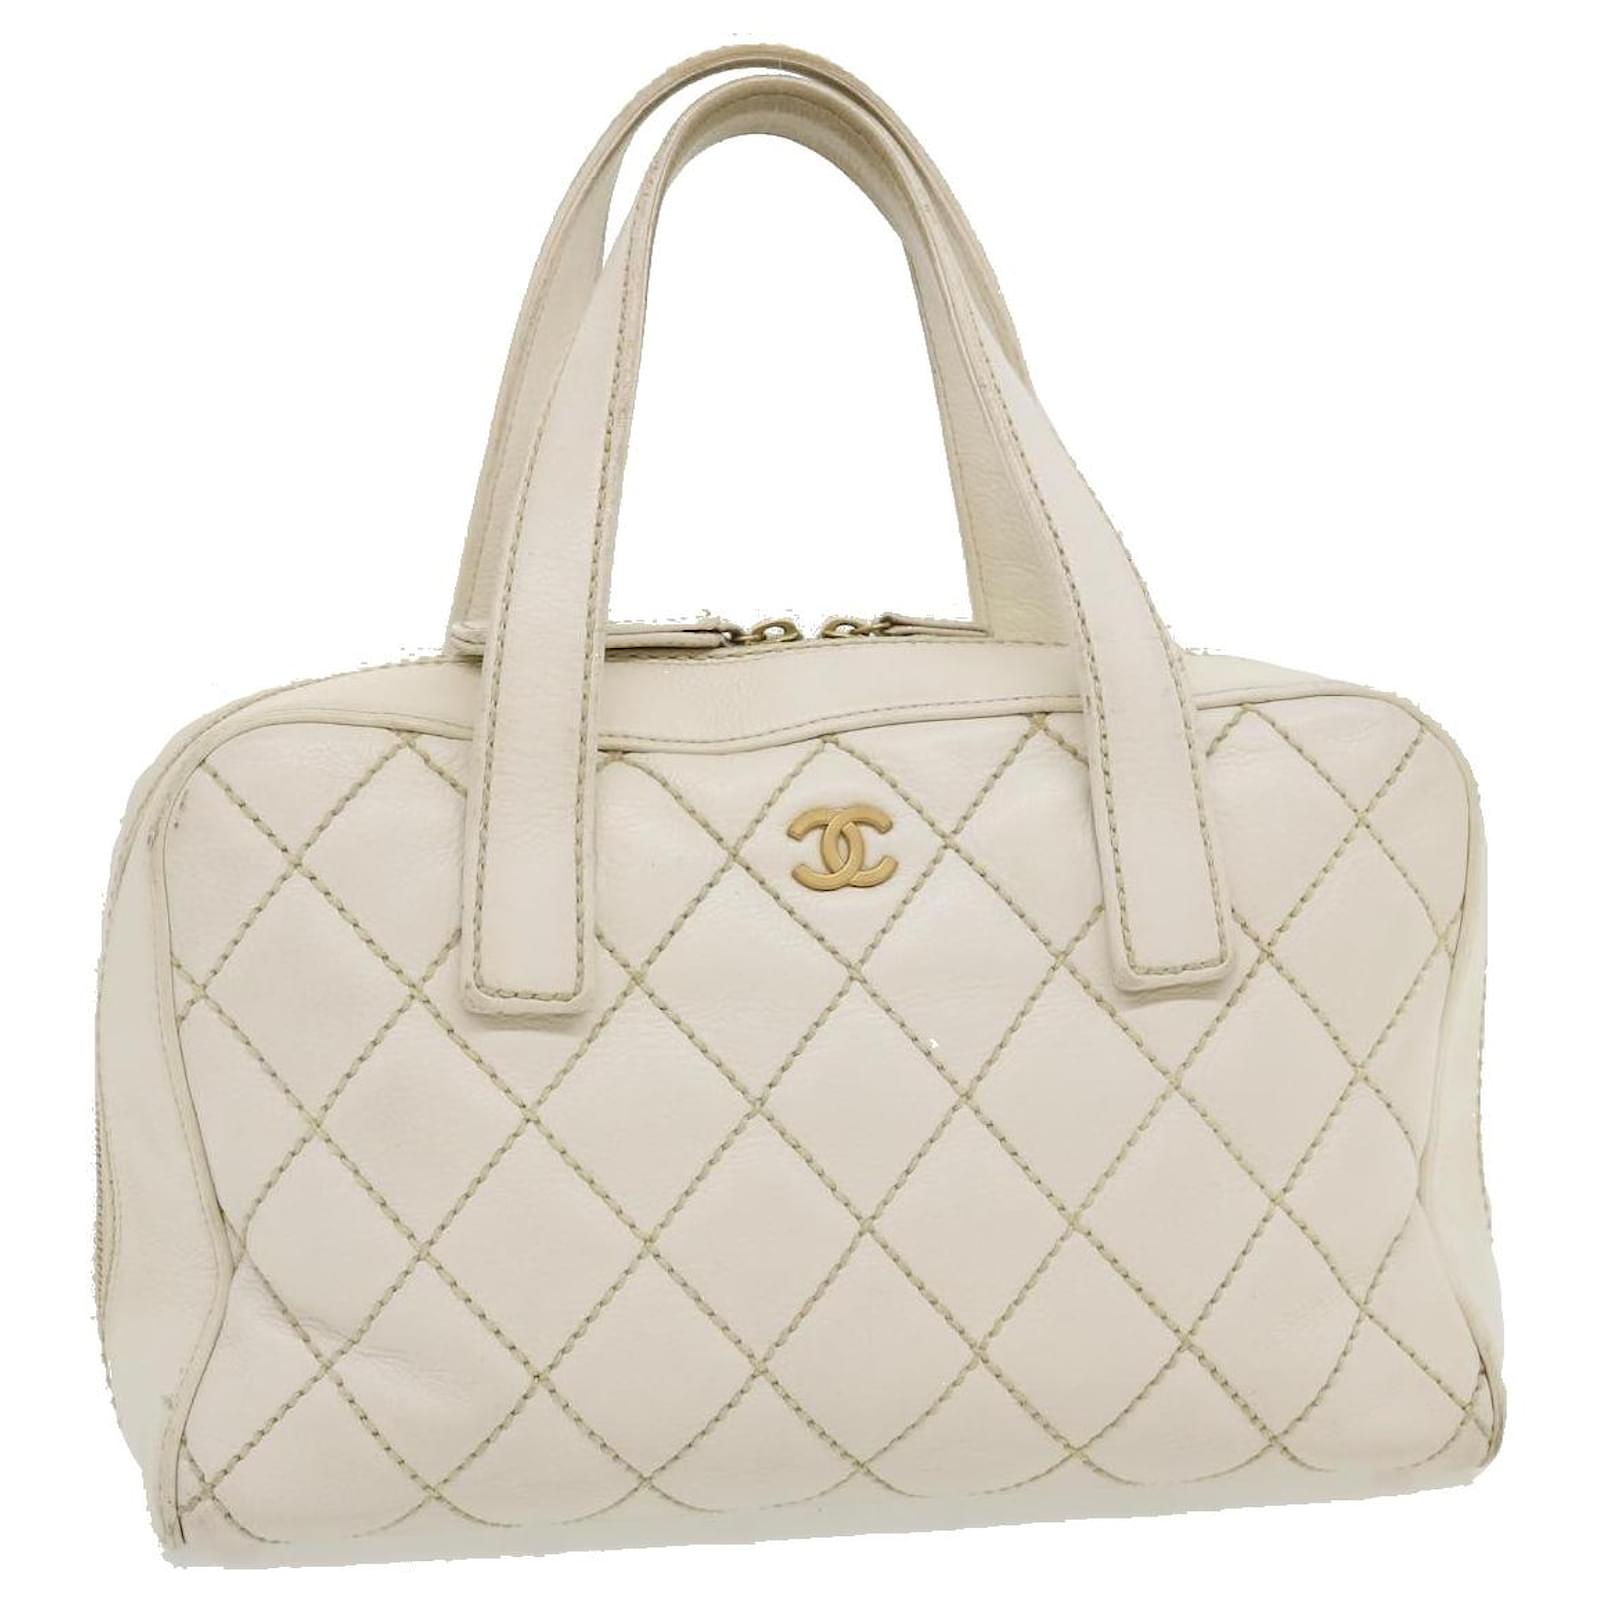 CHANEL, Bags, Chanel Wild Stitch Tote Bag Quilted Leather White